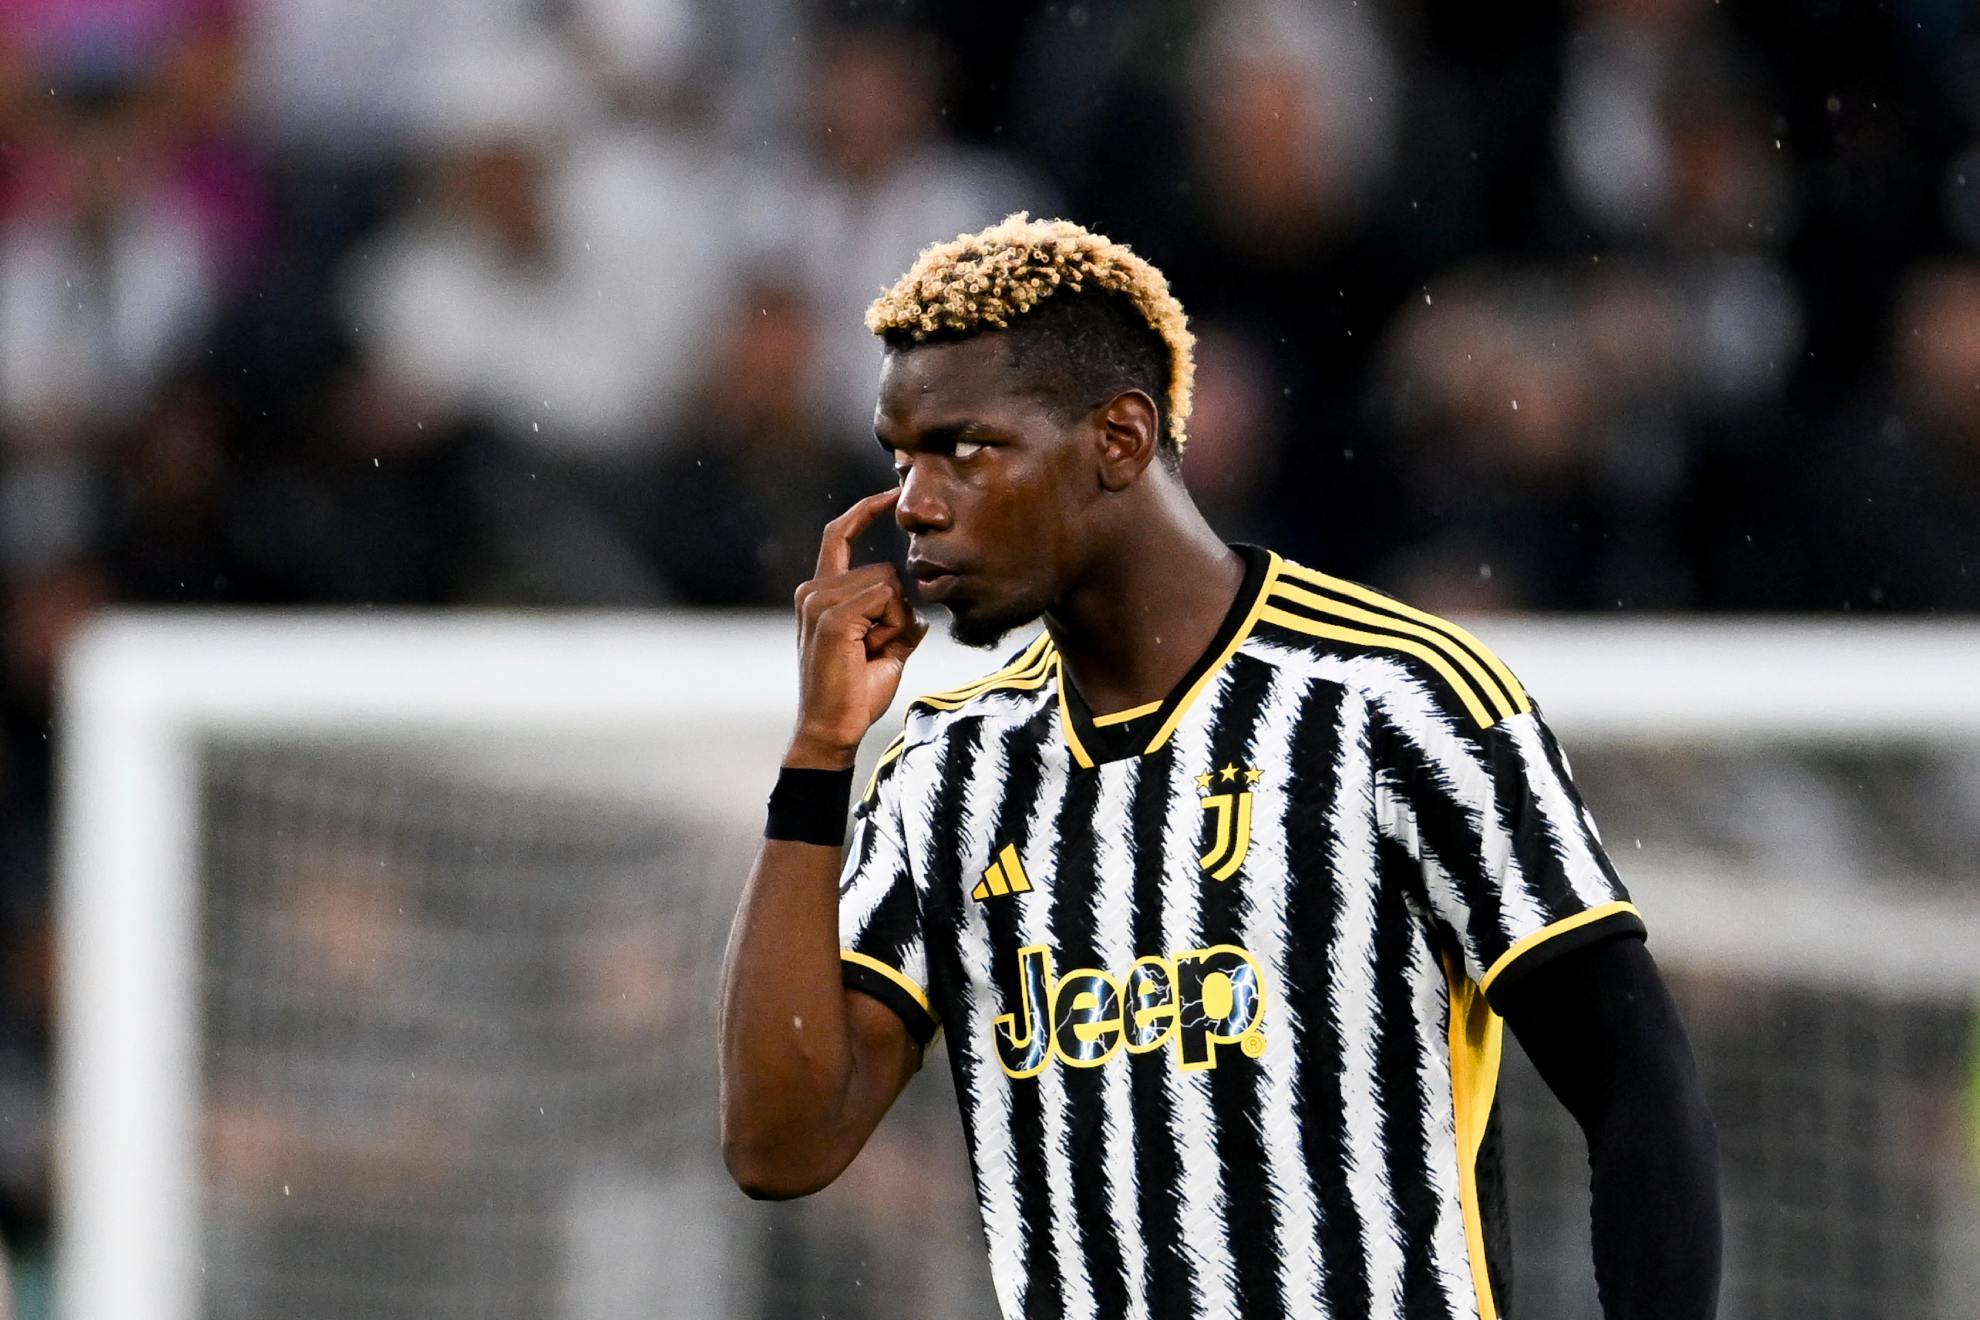 Paul Pogba is in the midst of a doping scandal